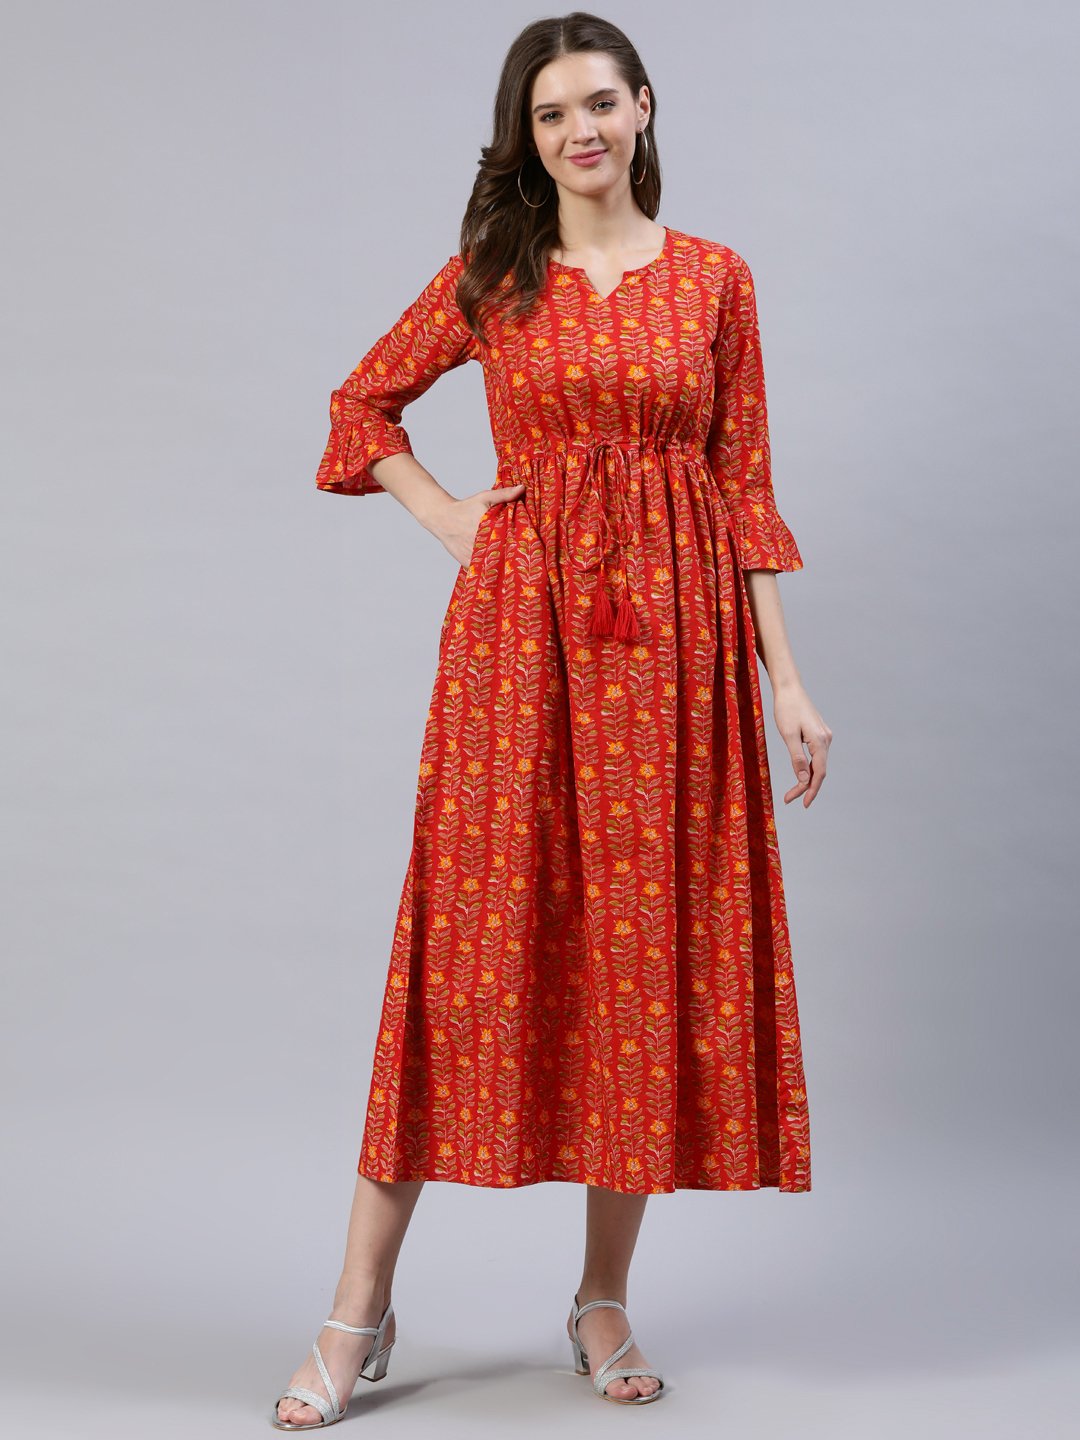 Women's Red Printed Dress With Flared Sleeves - Nayo Clothing